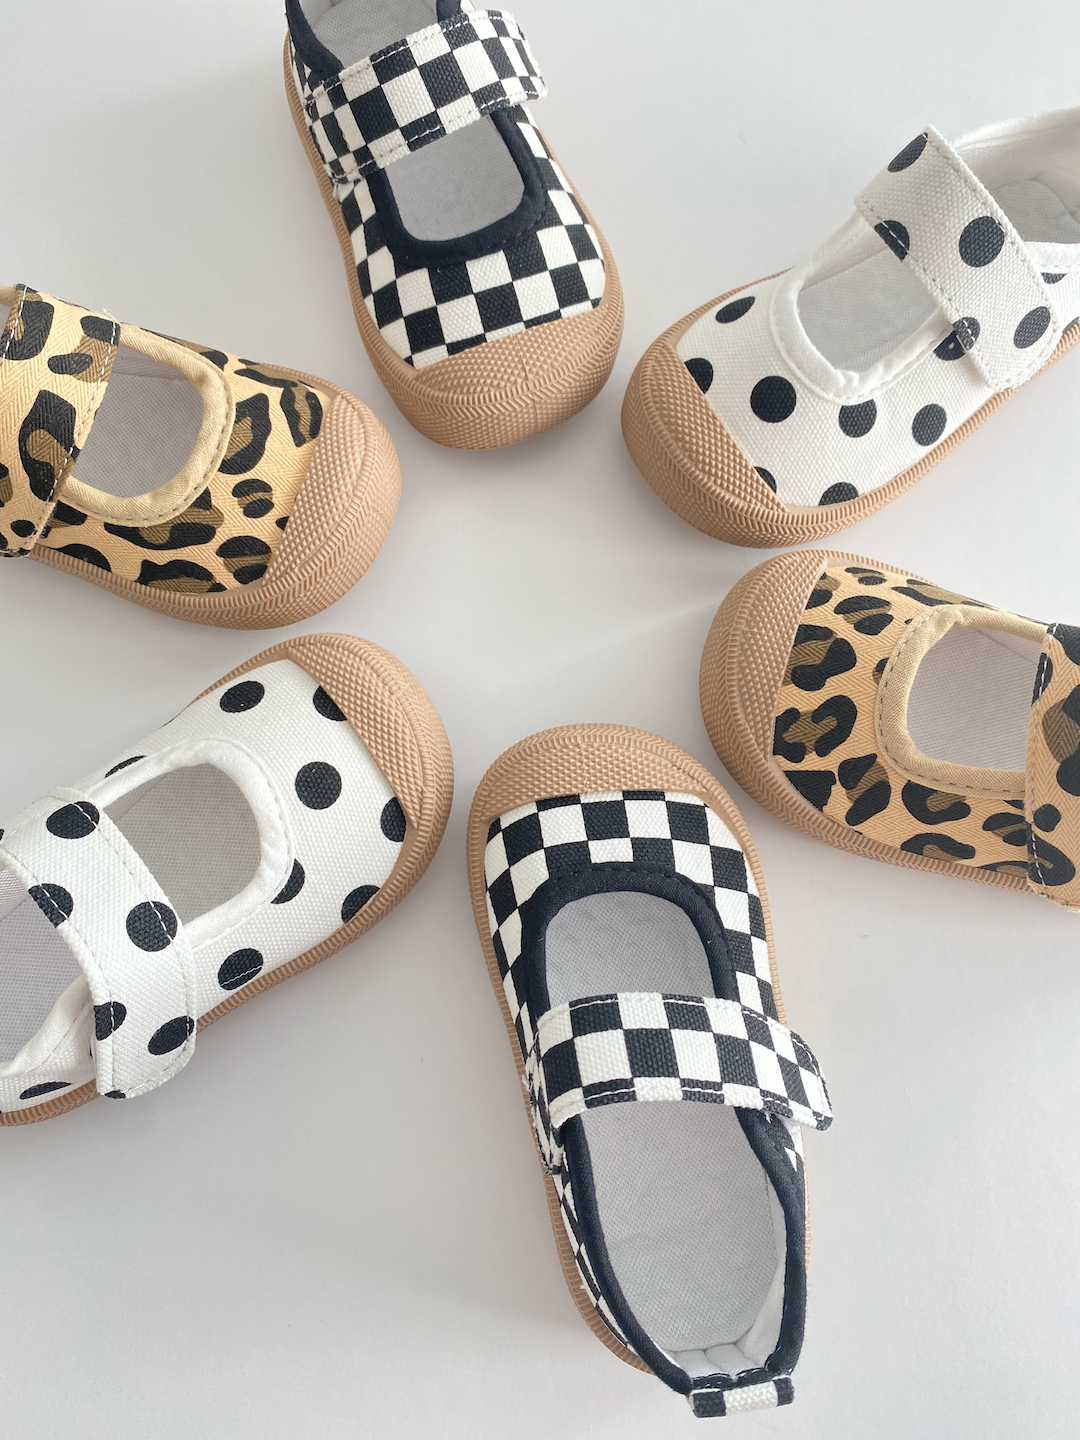 A selection of toddler mary jane sneakers arranged in a circle; various patterns: black-and-white checkerboard, white with black dots, leopard print